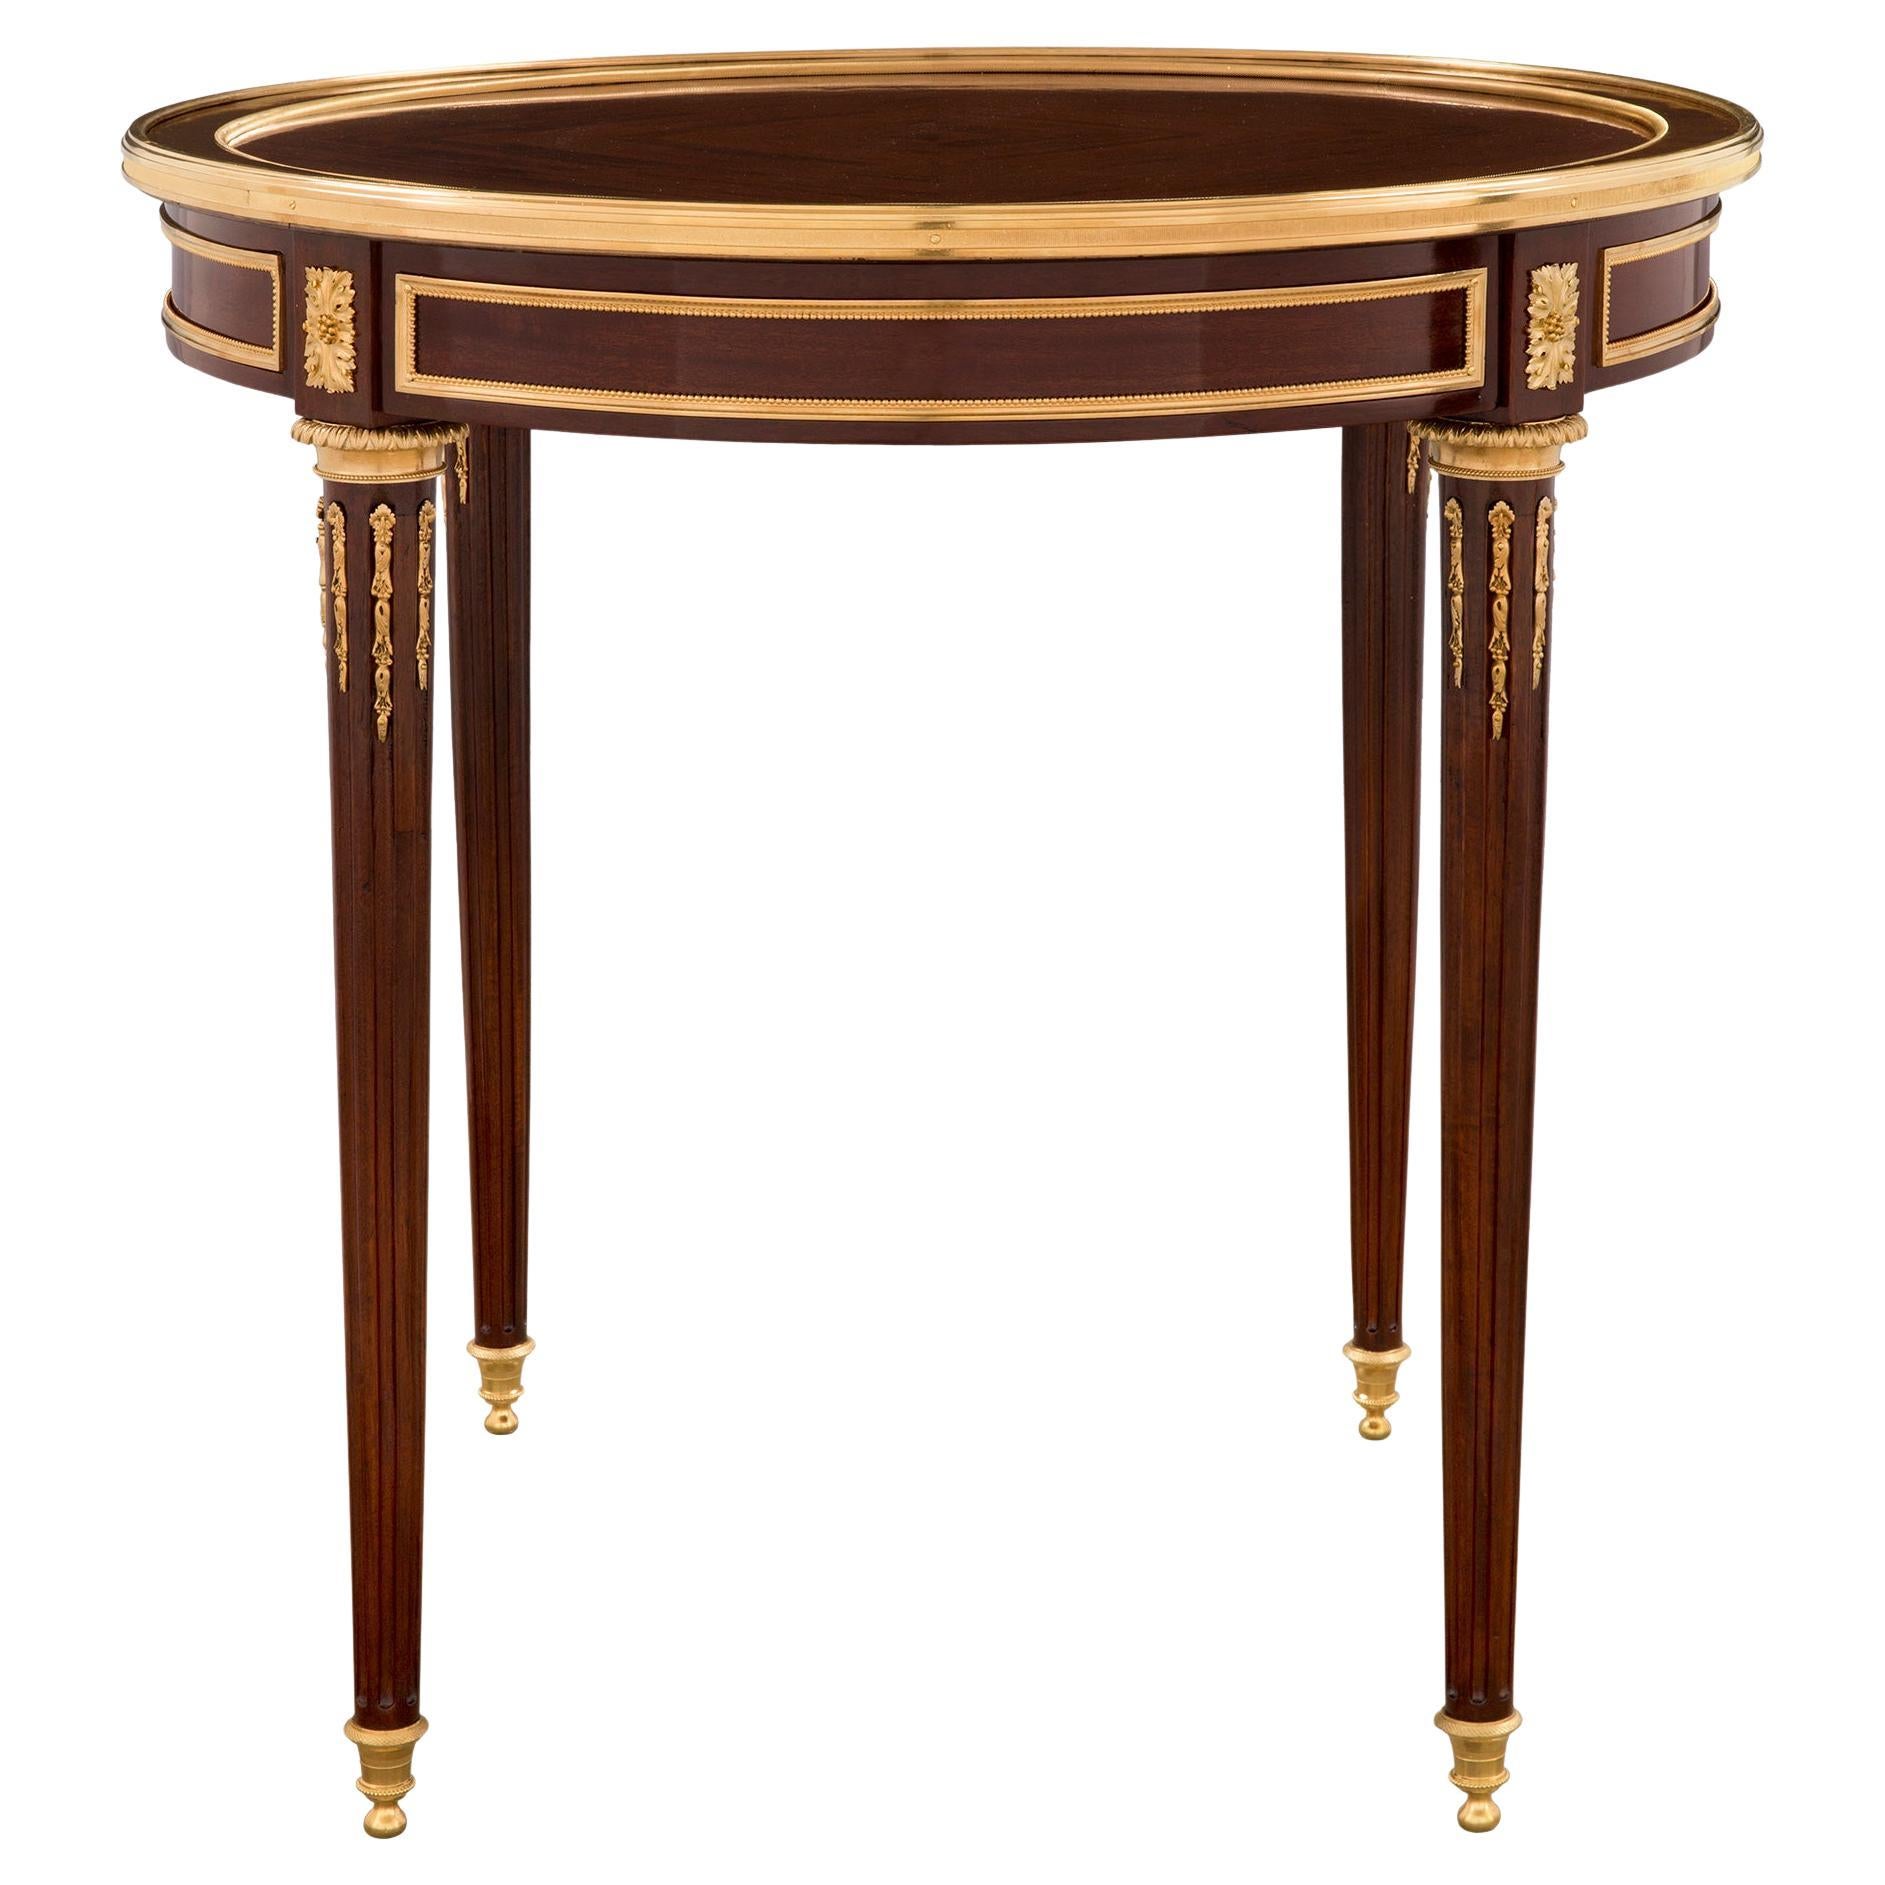 French 19th Century Louis XVI Style Mahogany Side Table, Attributed to Dasson For Sale